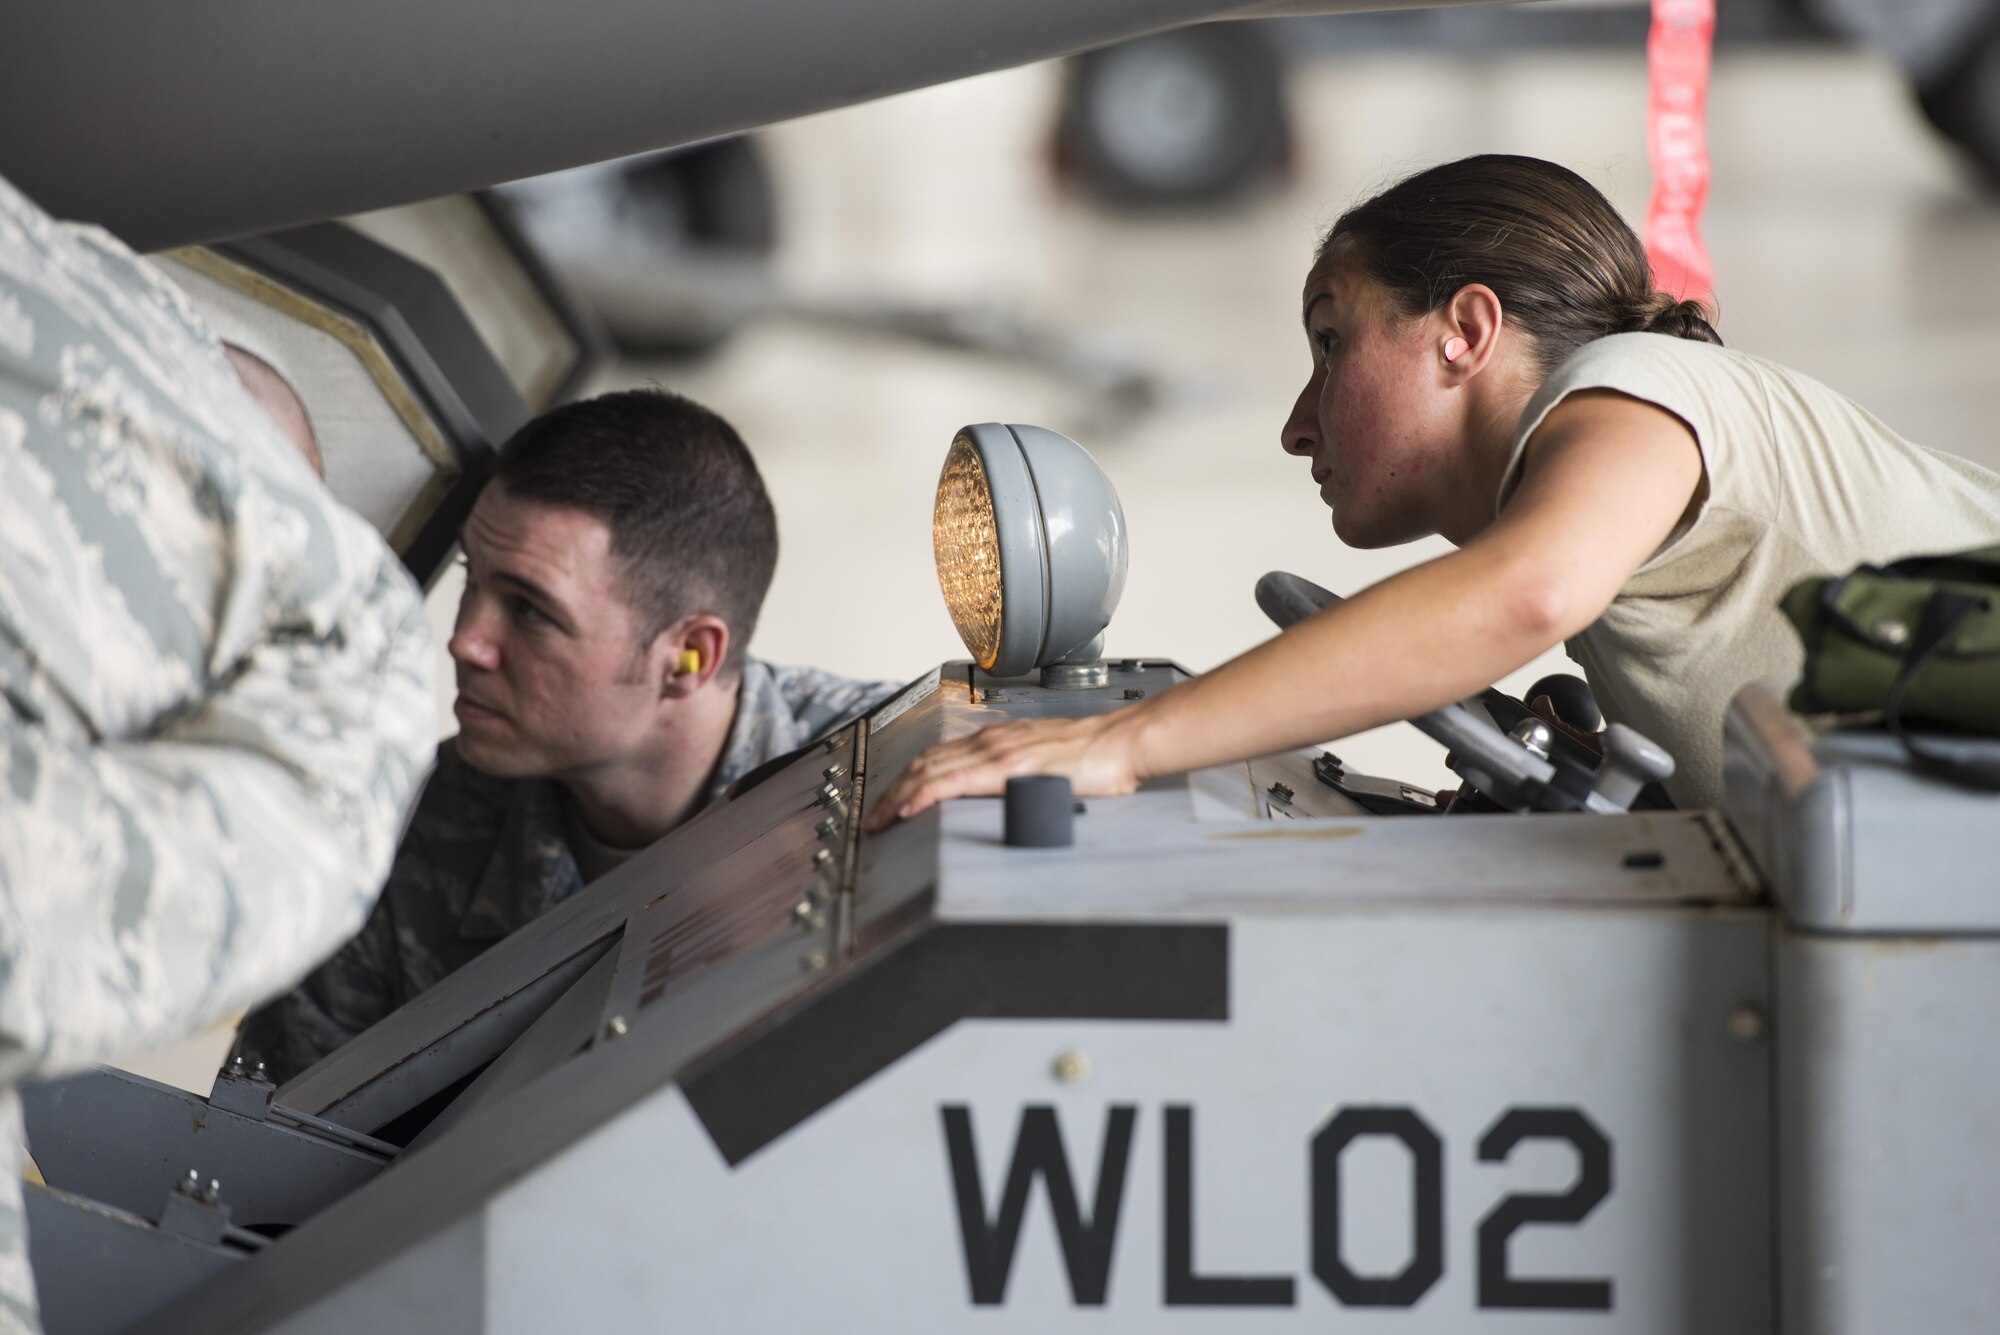 Senior Airman Danielle Gschwendner, 33rd Aircraft Maintenance Squadron load crew member, drives a jammer during a weapons load crew competition July 8, 2016, at Eglin Air Force Base, Fla. The load crew competition showcased the efficiency of load crew teams to safely and properly arm an F-35 within time constraints. (U.S. Air Force photo by Senior Airman Stormy Archer/Released)